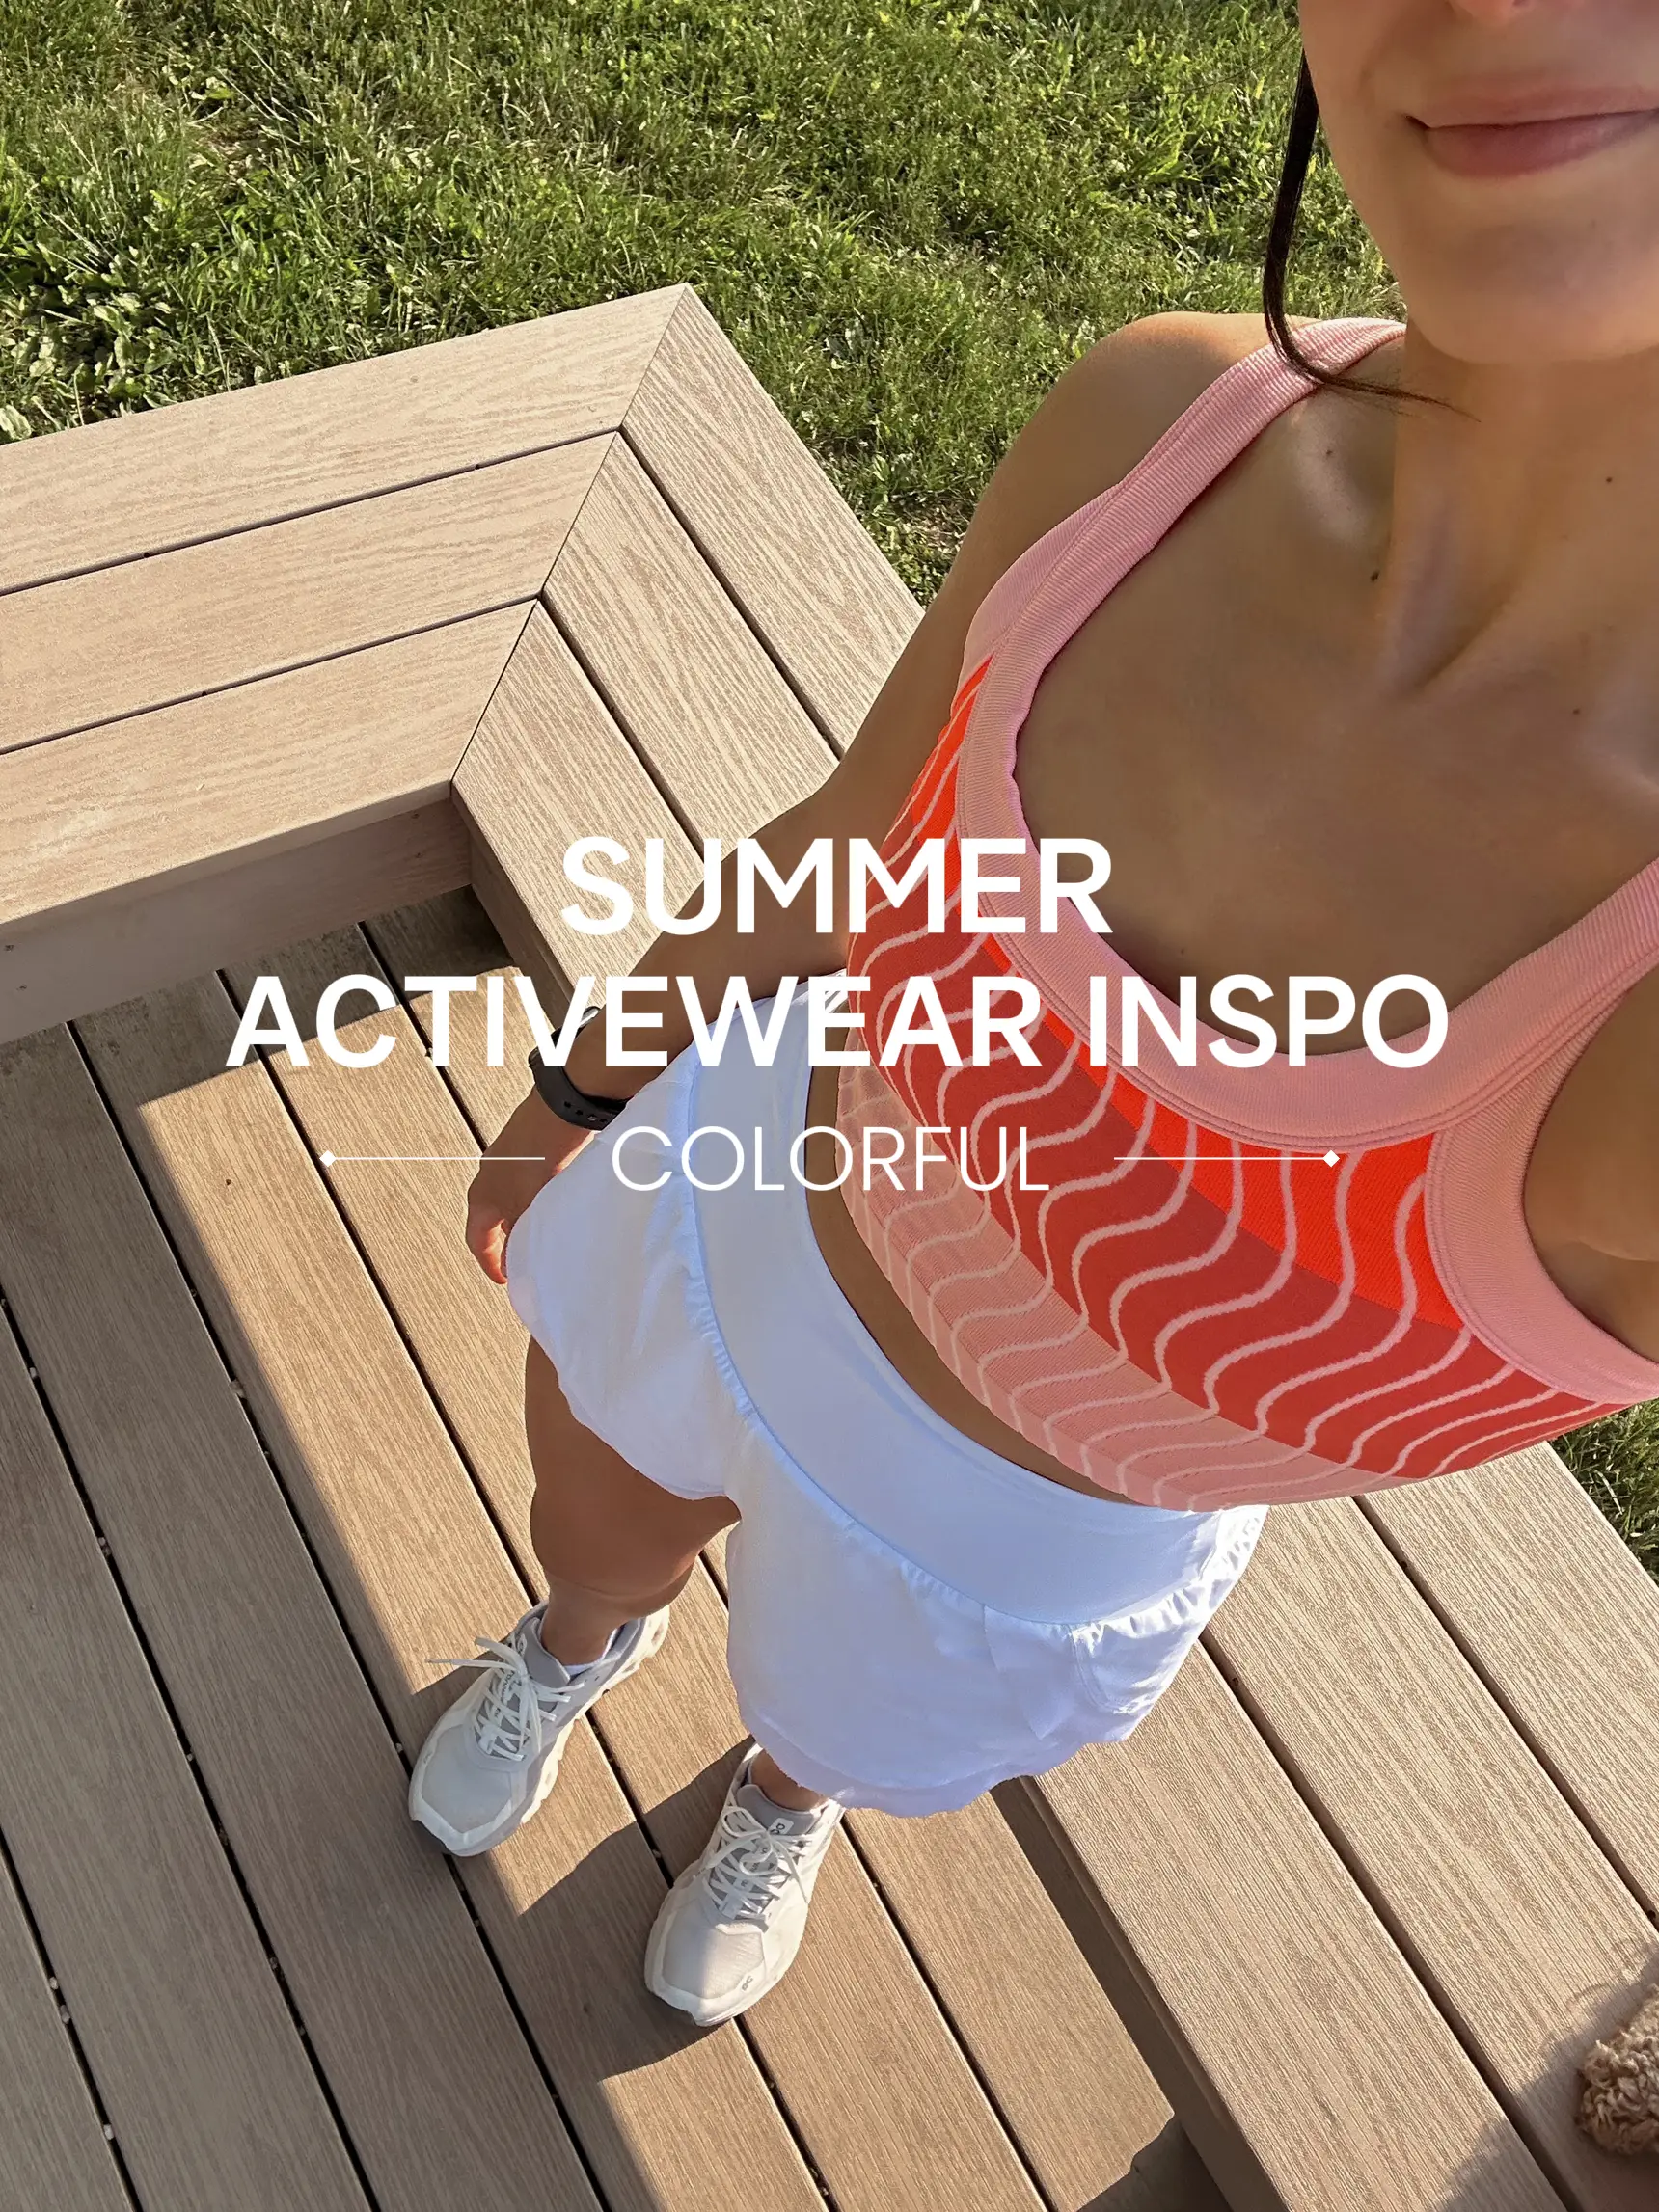 stylish activewear for outdoor activities - Lemon8 Search